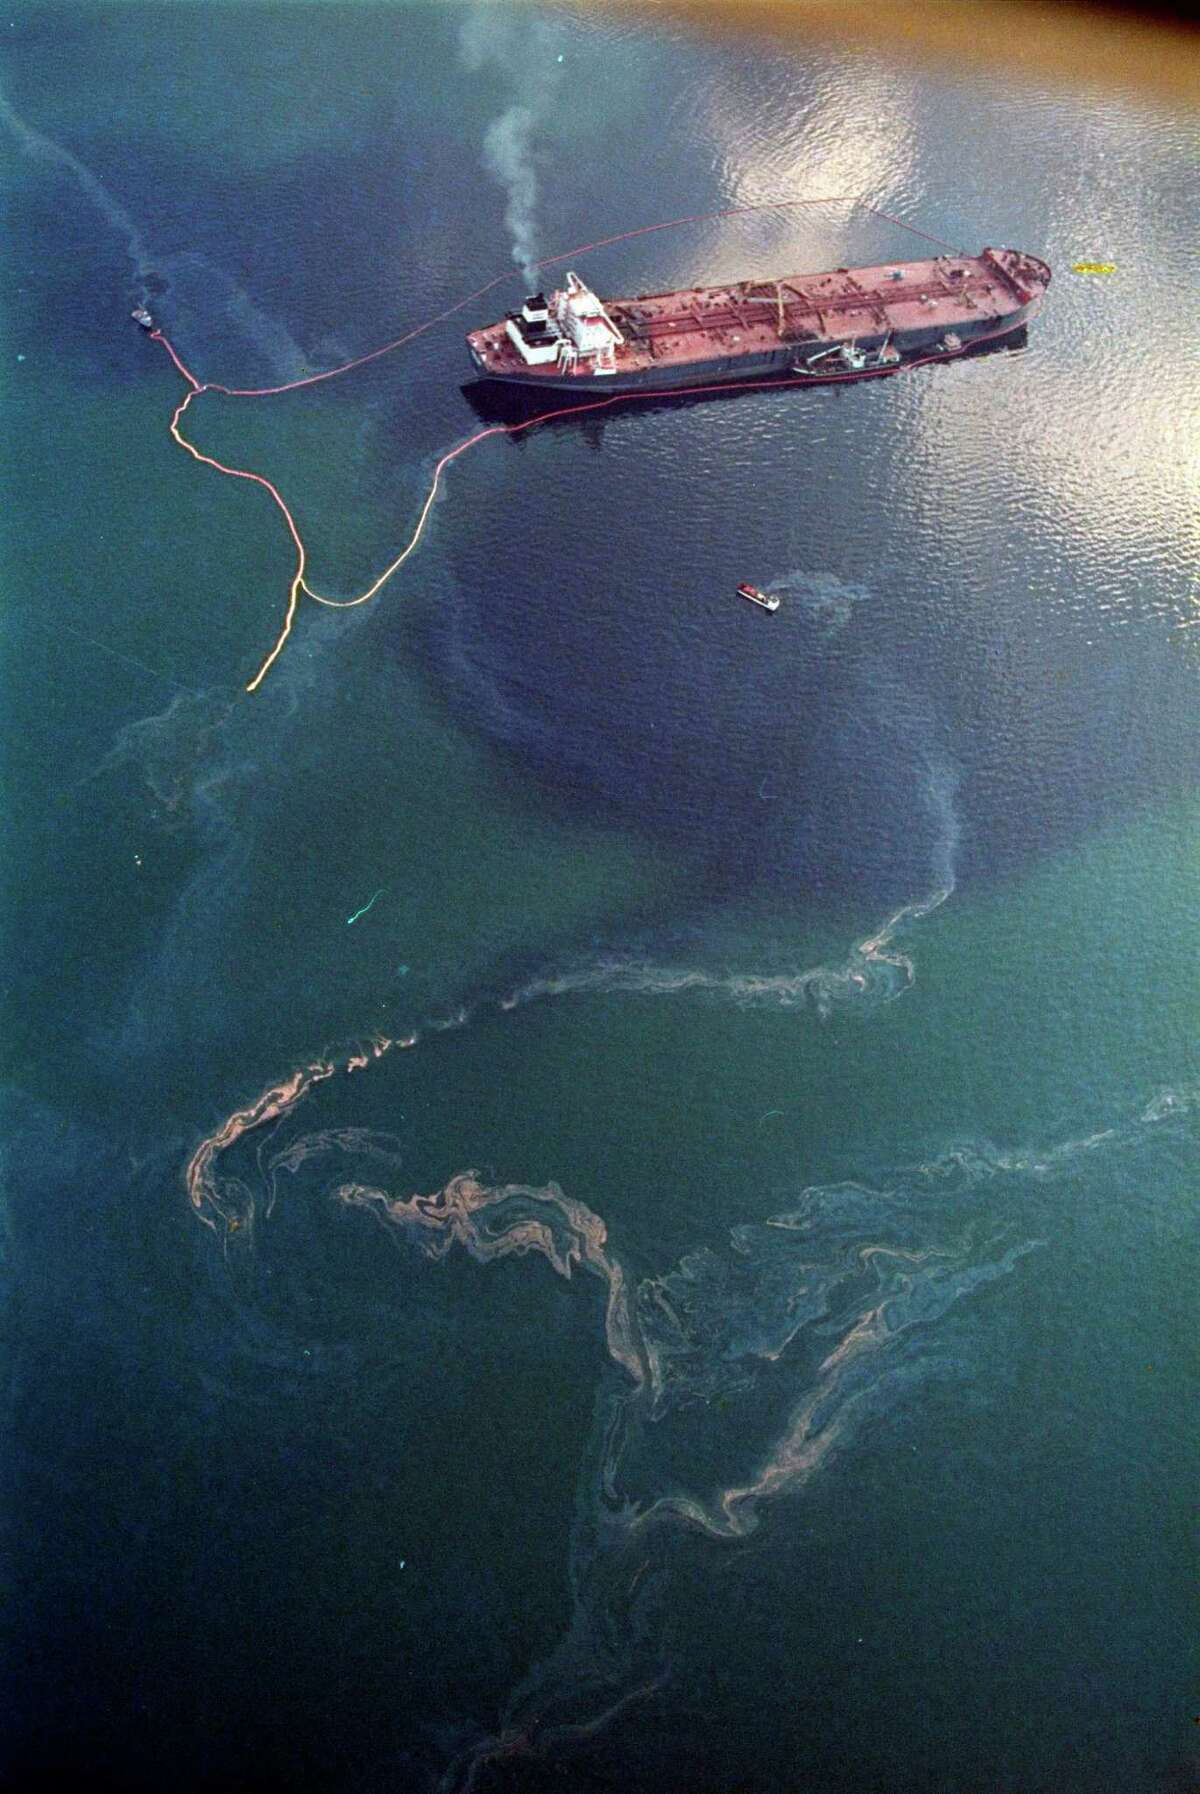 Crude oil from the tanker Exxon Valdez, top, swirls on the surface of Alaska's Prince William Sound near Naked Island. The 987-foot tanker, carrying 53 million gallons of crude, struck Bligh Reef at 12:04 a.m. on March 24, 1989, and within hours unleashed an estimated 10.8 million gallons of thick, toxic crude oil into the water. Storms and currents then smeared it over 1,300 miles of shoreline. Twenty five years later, the region, its people and its wildfire are still recovering.